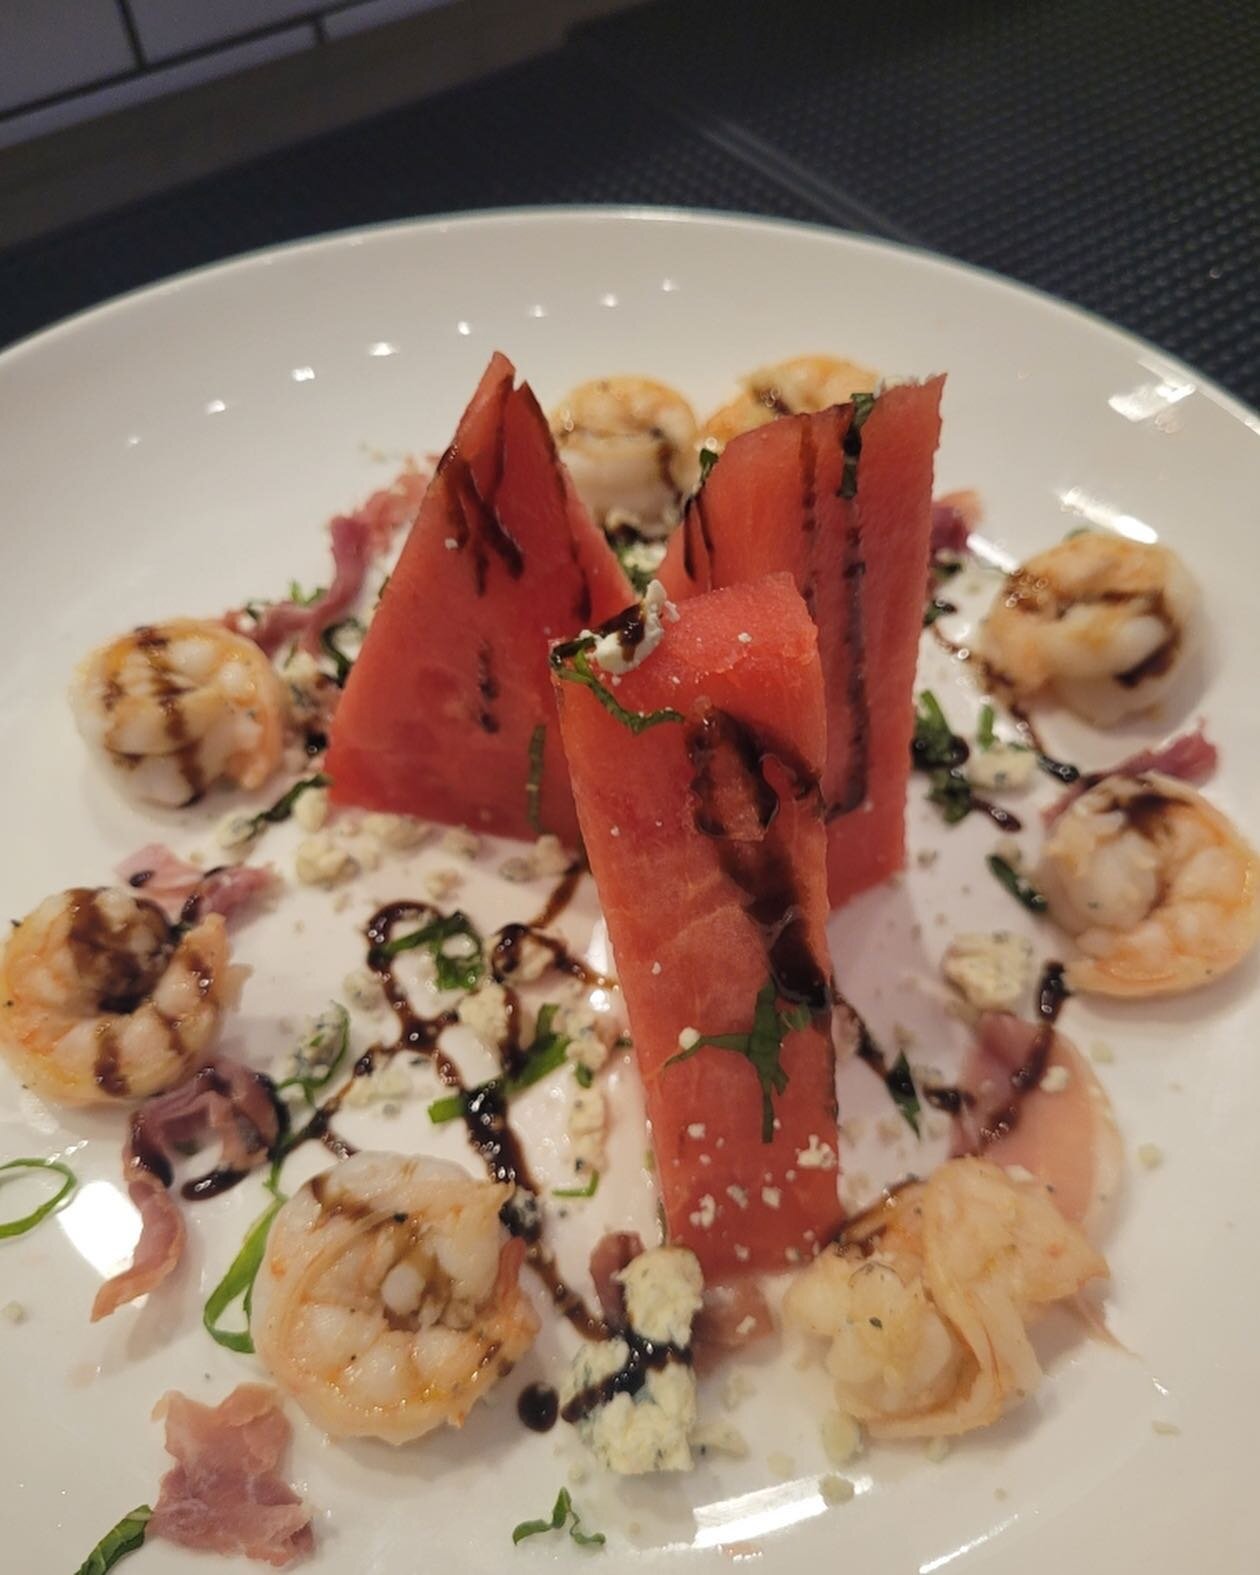 Tonight&rsquo;s appetizer special: fresh watermelon shrimp salad 🍉

Tonight&rsquo;s dinner special: shrimp spaghetti 🍤

Come get yours before I eat all of it🤪